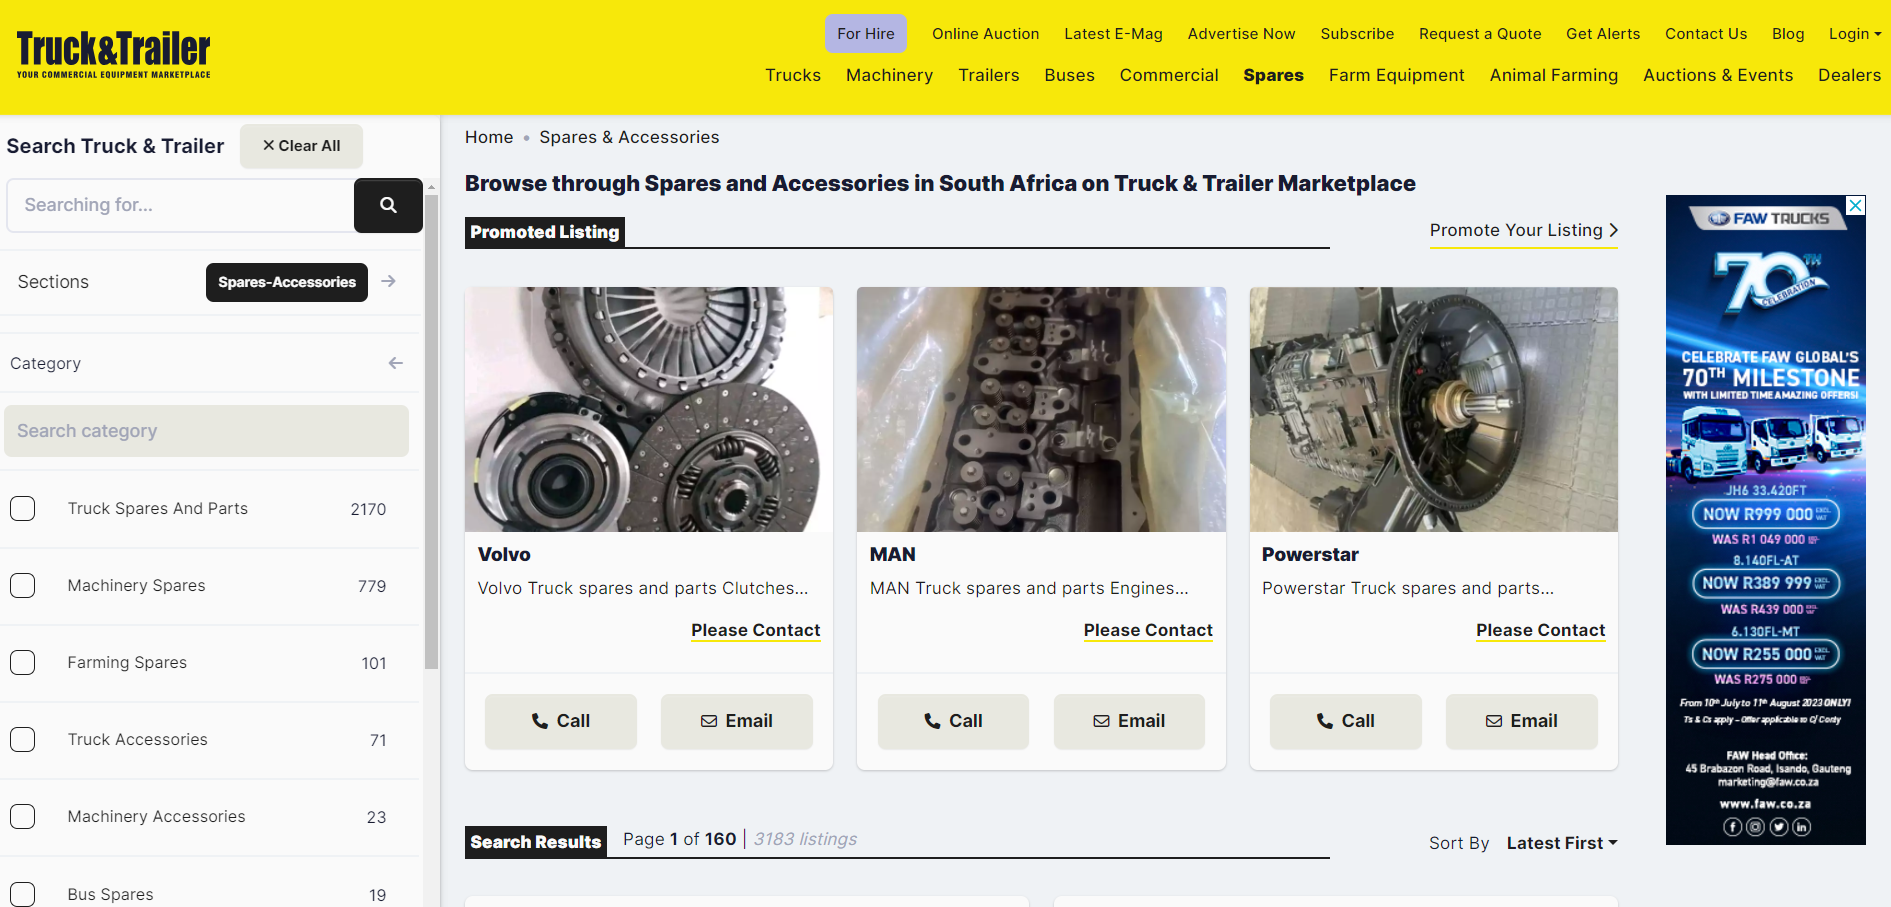 Spares and accessories, spares for sale on Truck & Trailer, truck spare, Machinery spares, Farming spares,Trailer spares, Truck accessories.png